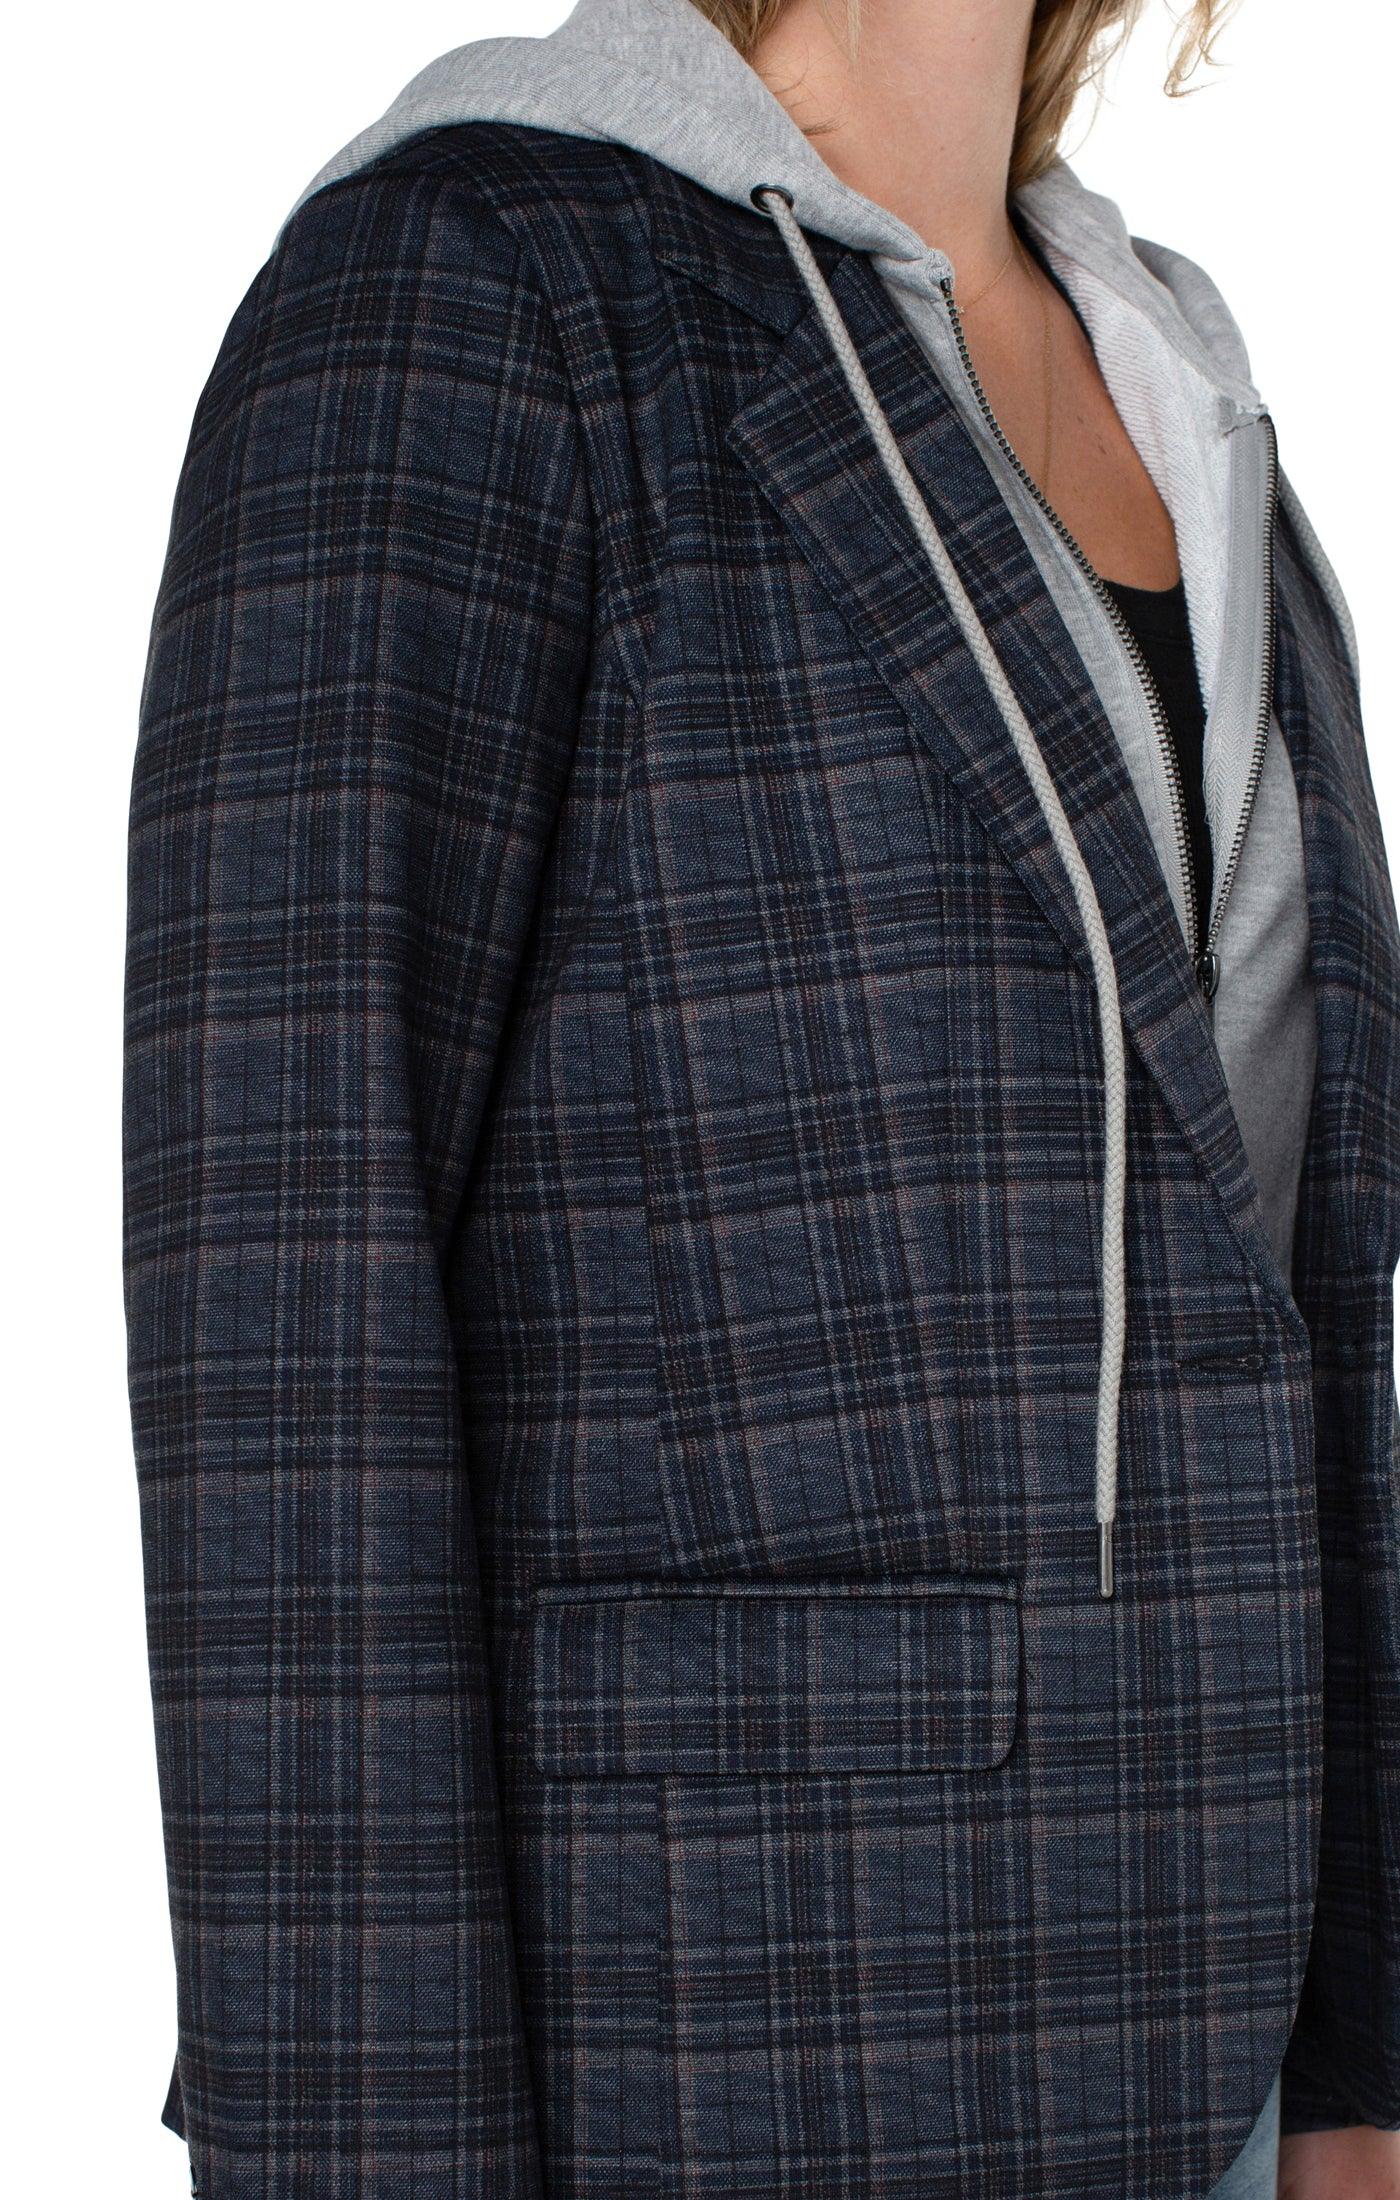 Liverpool Navy Plaid Blazer with Removable Hood - Strawberry Moon Boutique